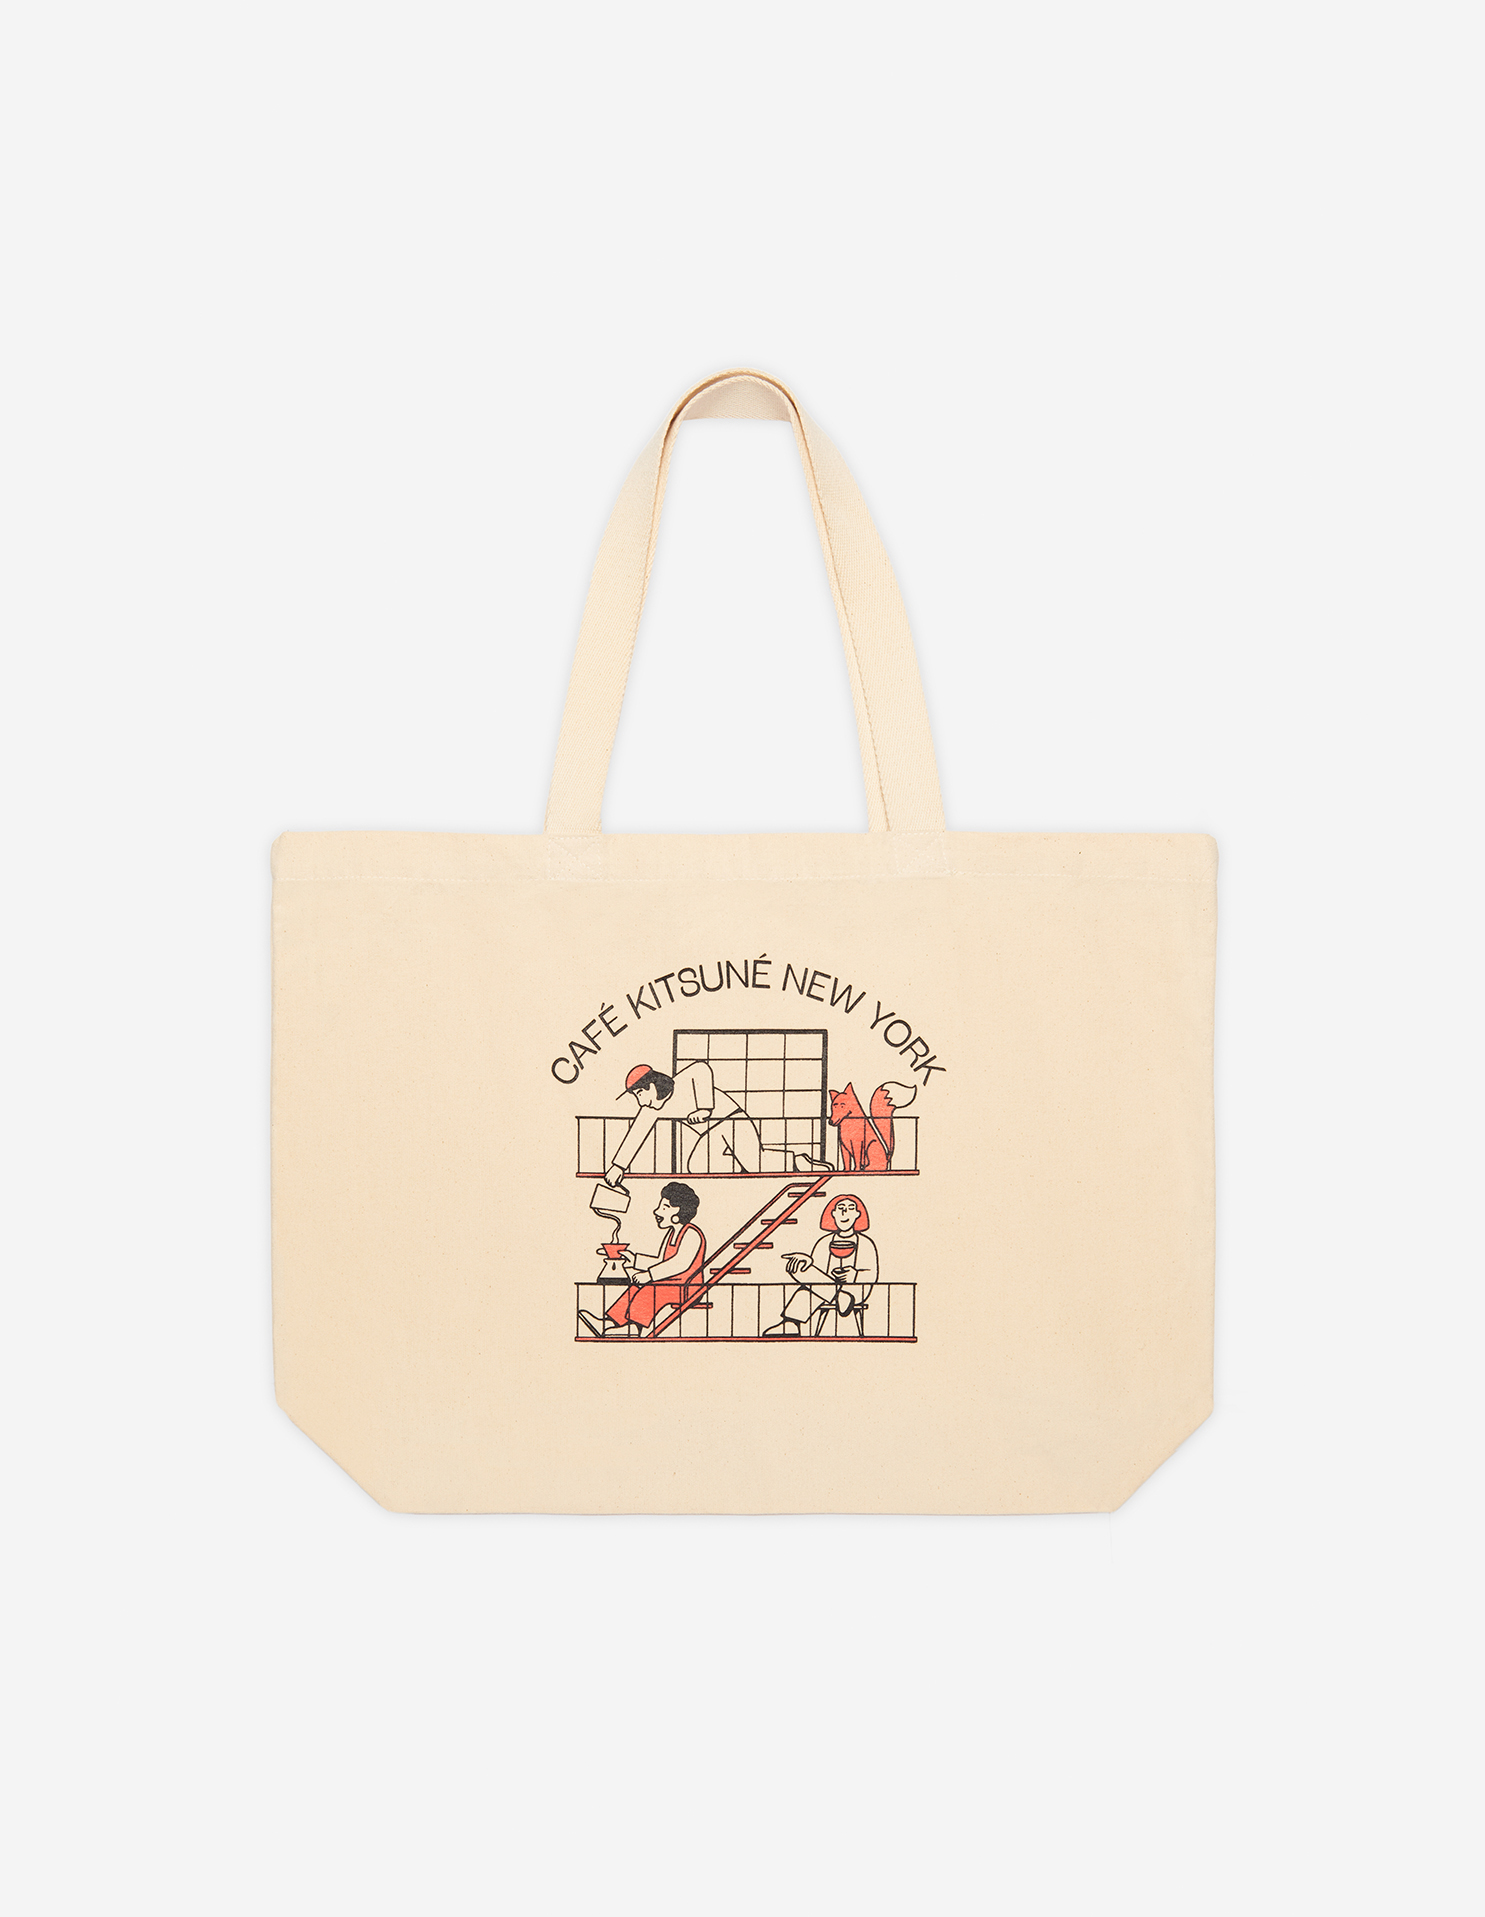 CAFE NEW YORK CLASSIC TOTE BAG